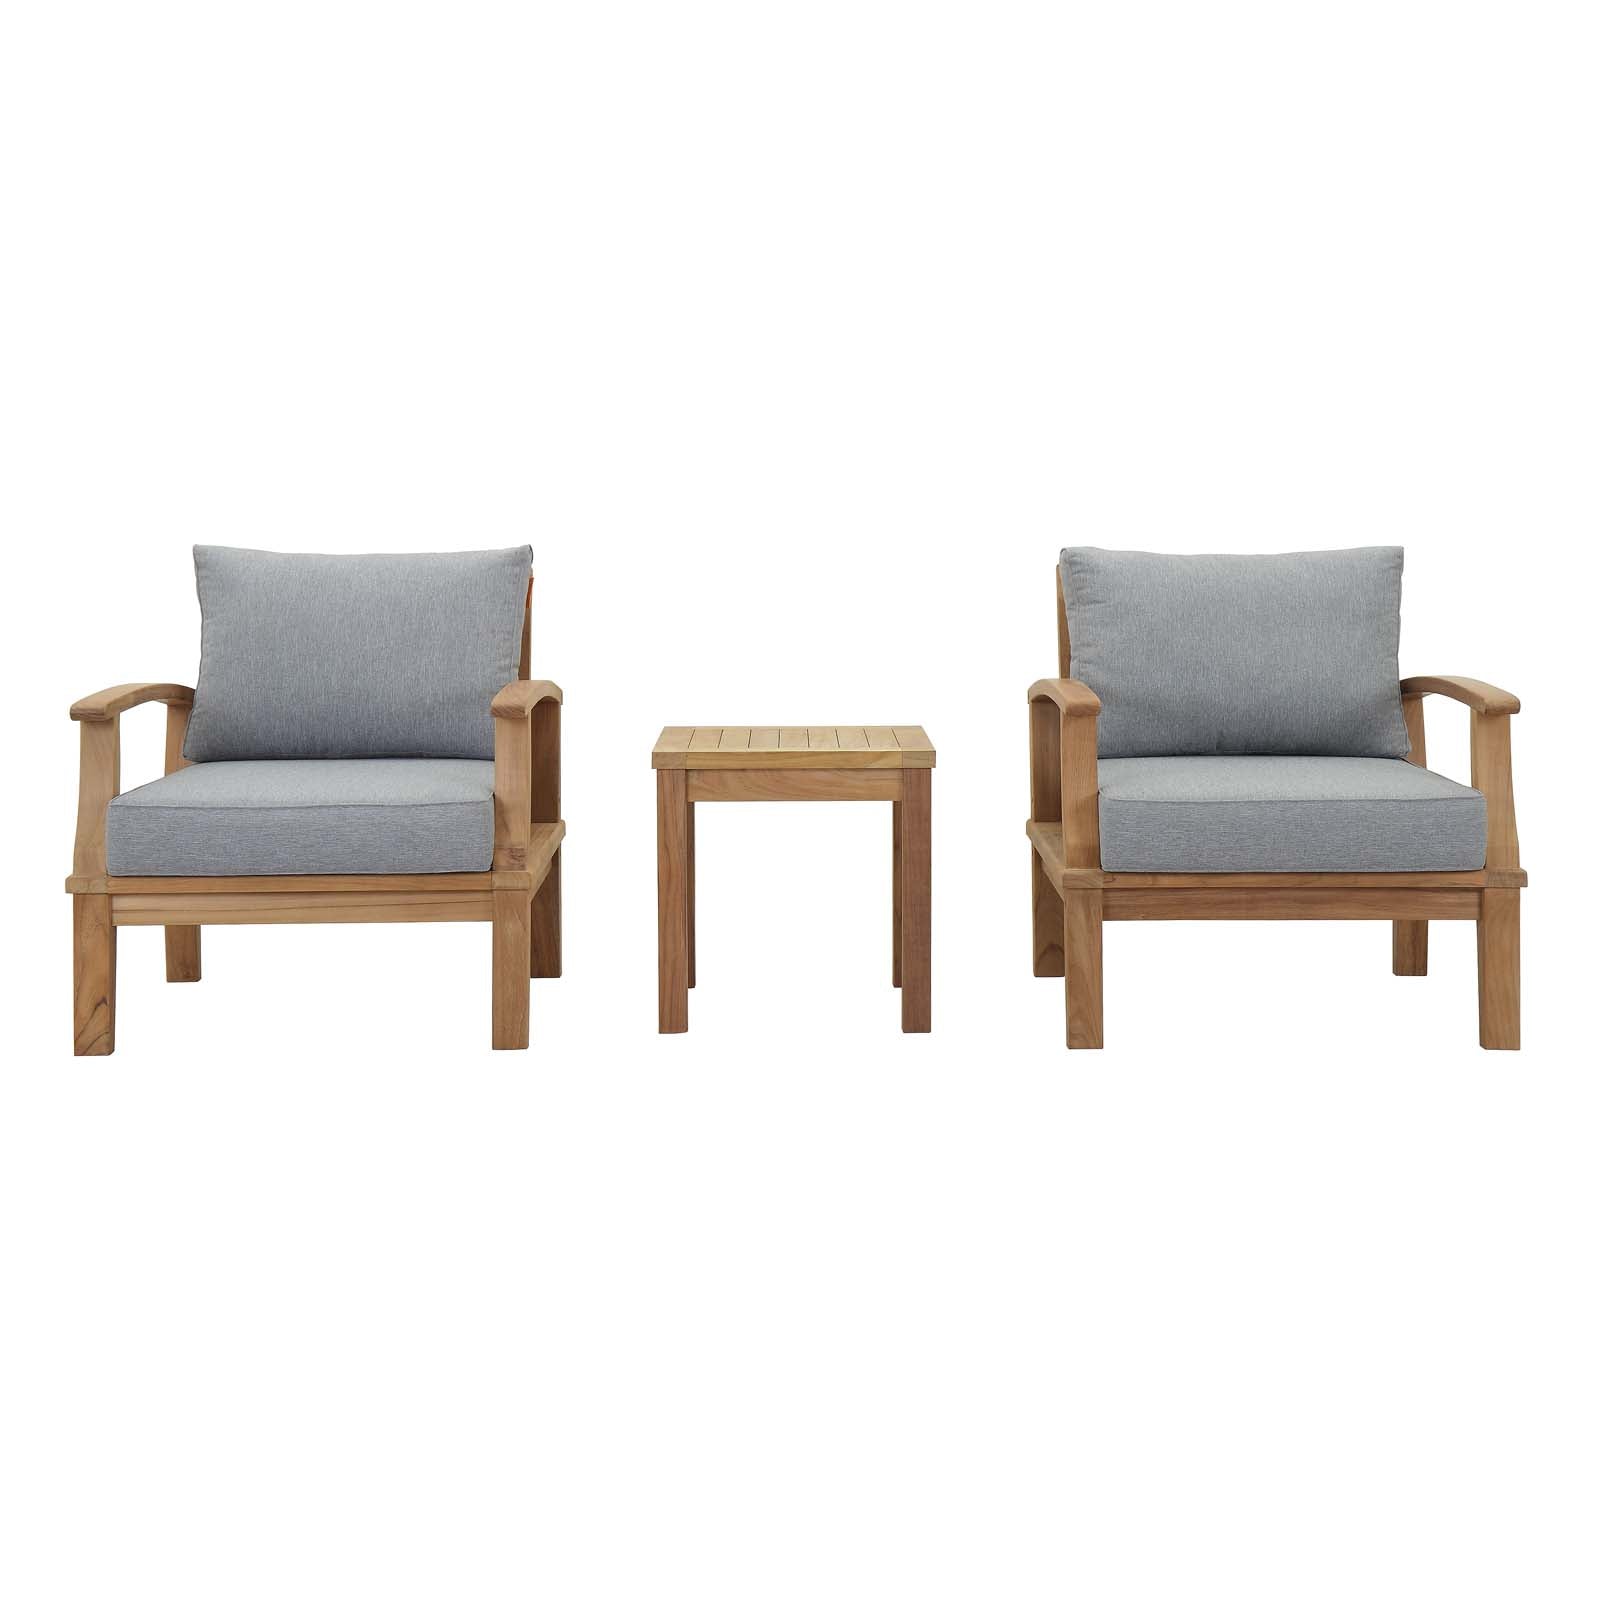 Marina 3 Piece Outdoor Patio Teak Set with Side Table